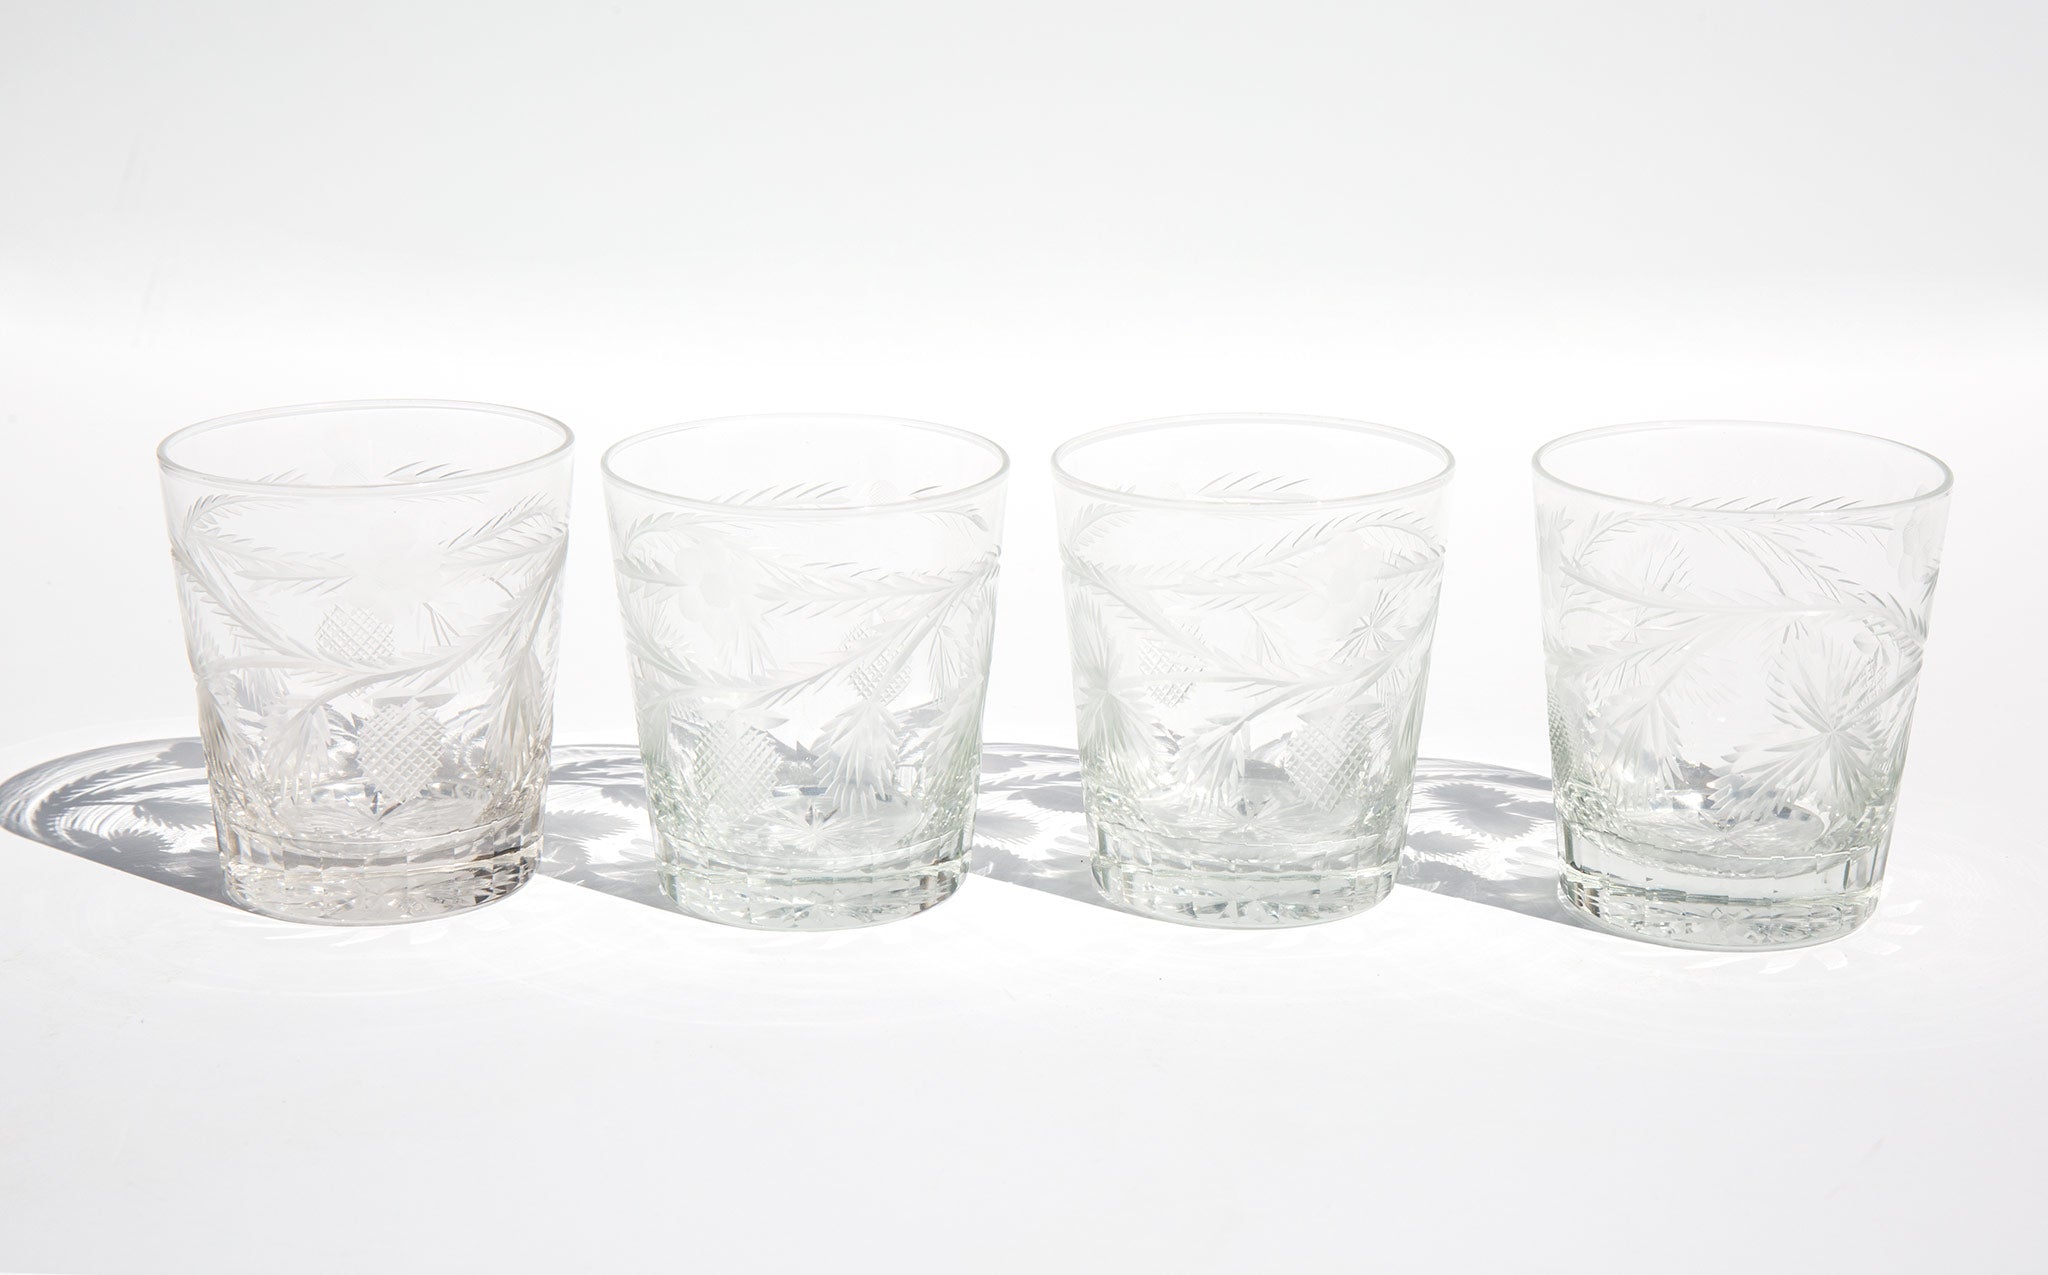 Etched Fruit and Flower Glasses